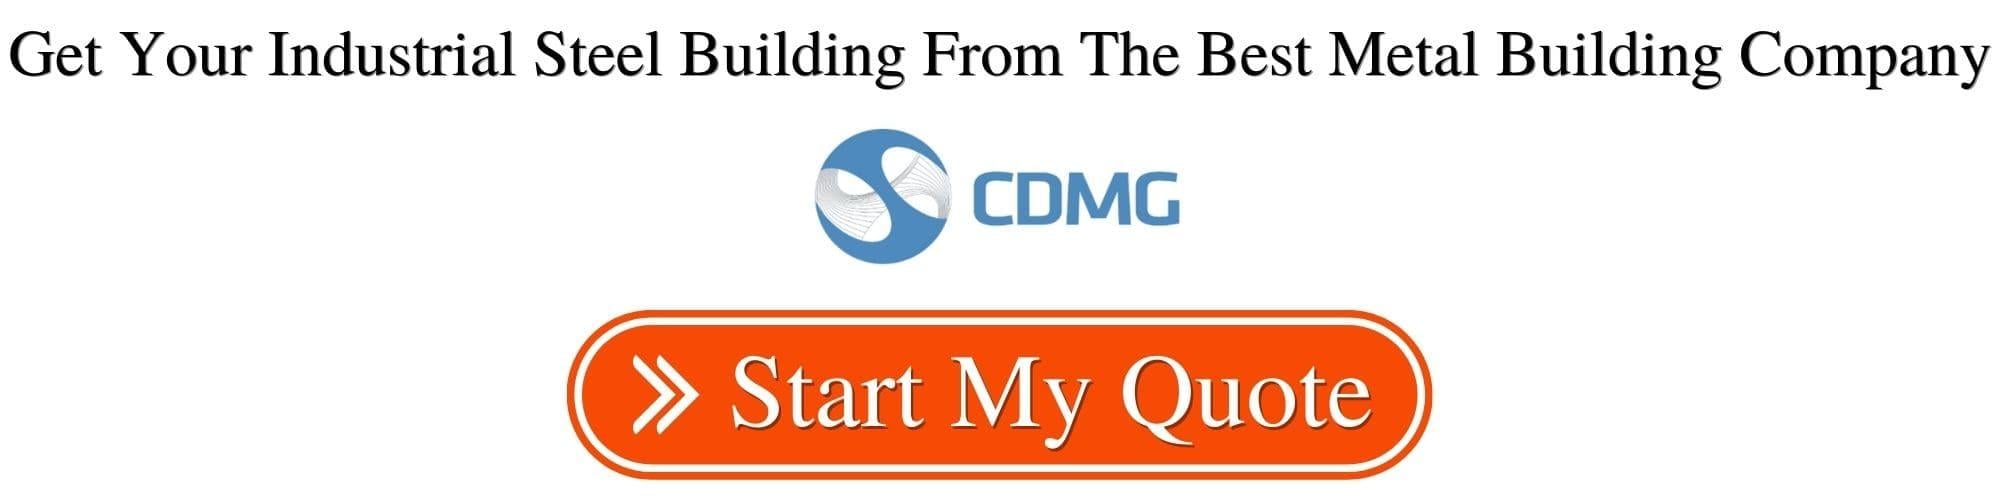 Get Started On Your Metal Building Project Today With CDMG